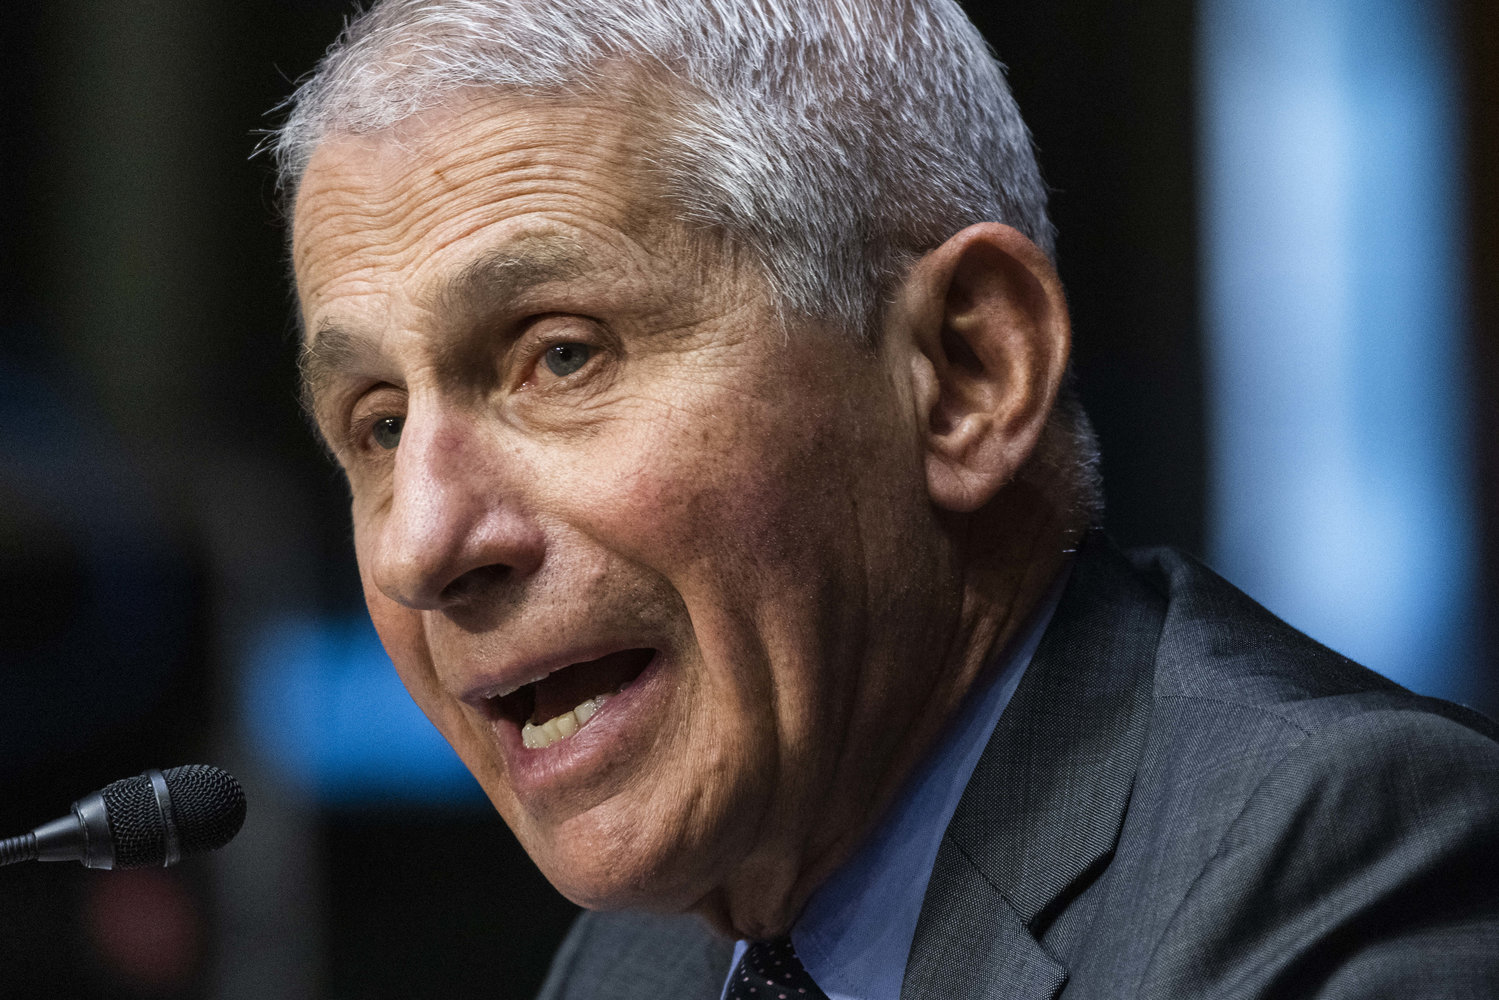 Anthony Fauci, director of the National Institute of Allergy and Infectious Diseases at the National Institutes of Health, said Sunday that the U.S. is turning the corner on the recent surge of COVID-19. (Jim Lo Scalzo/Pool/Abaca/TNS)